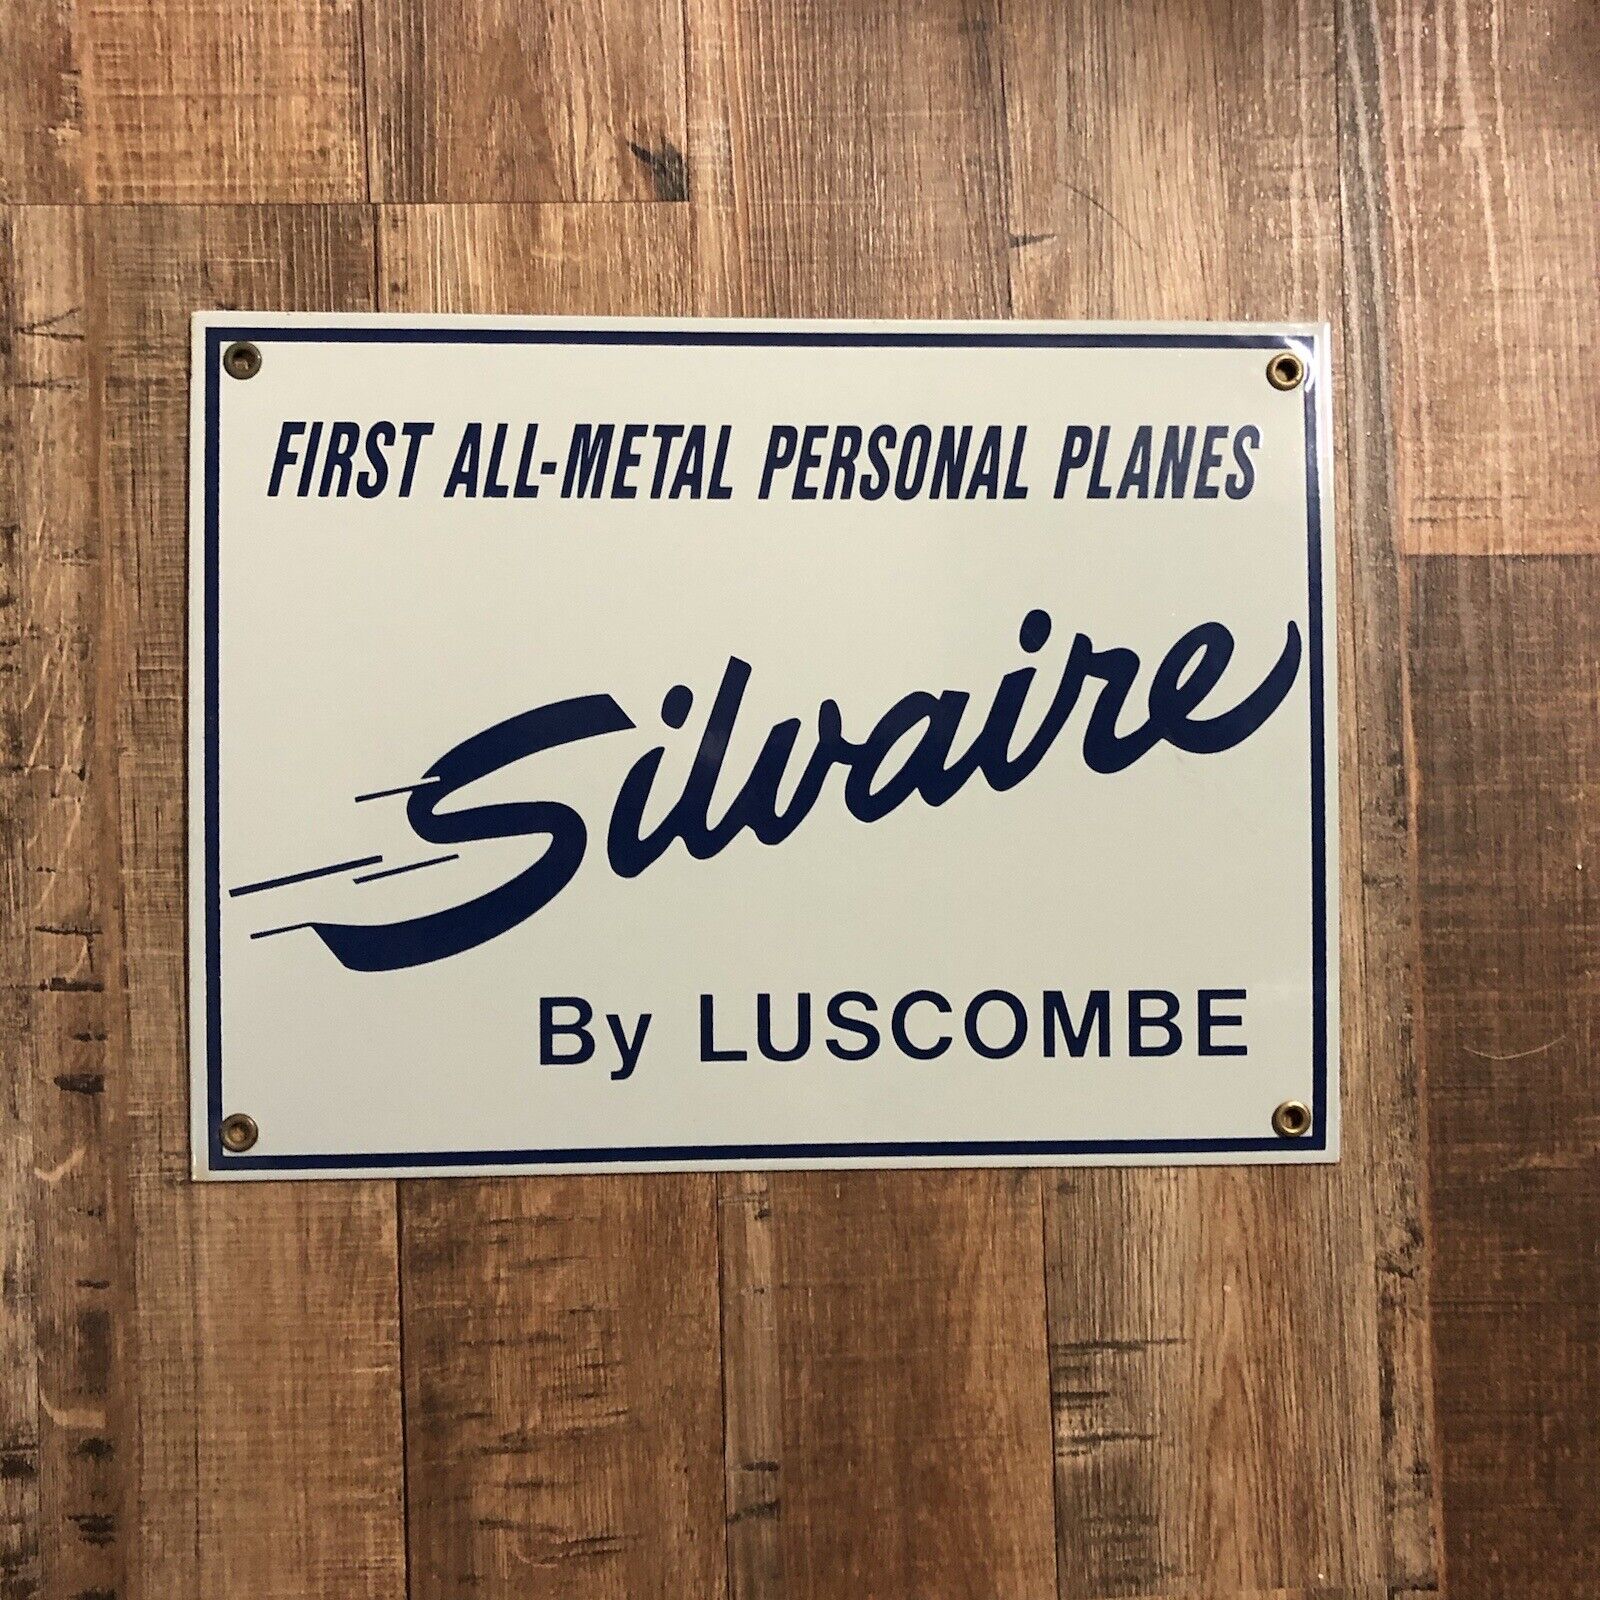 Luscombe Aircraft Porcelain Sign